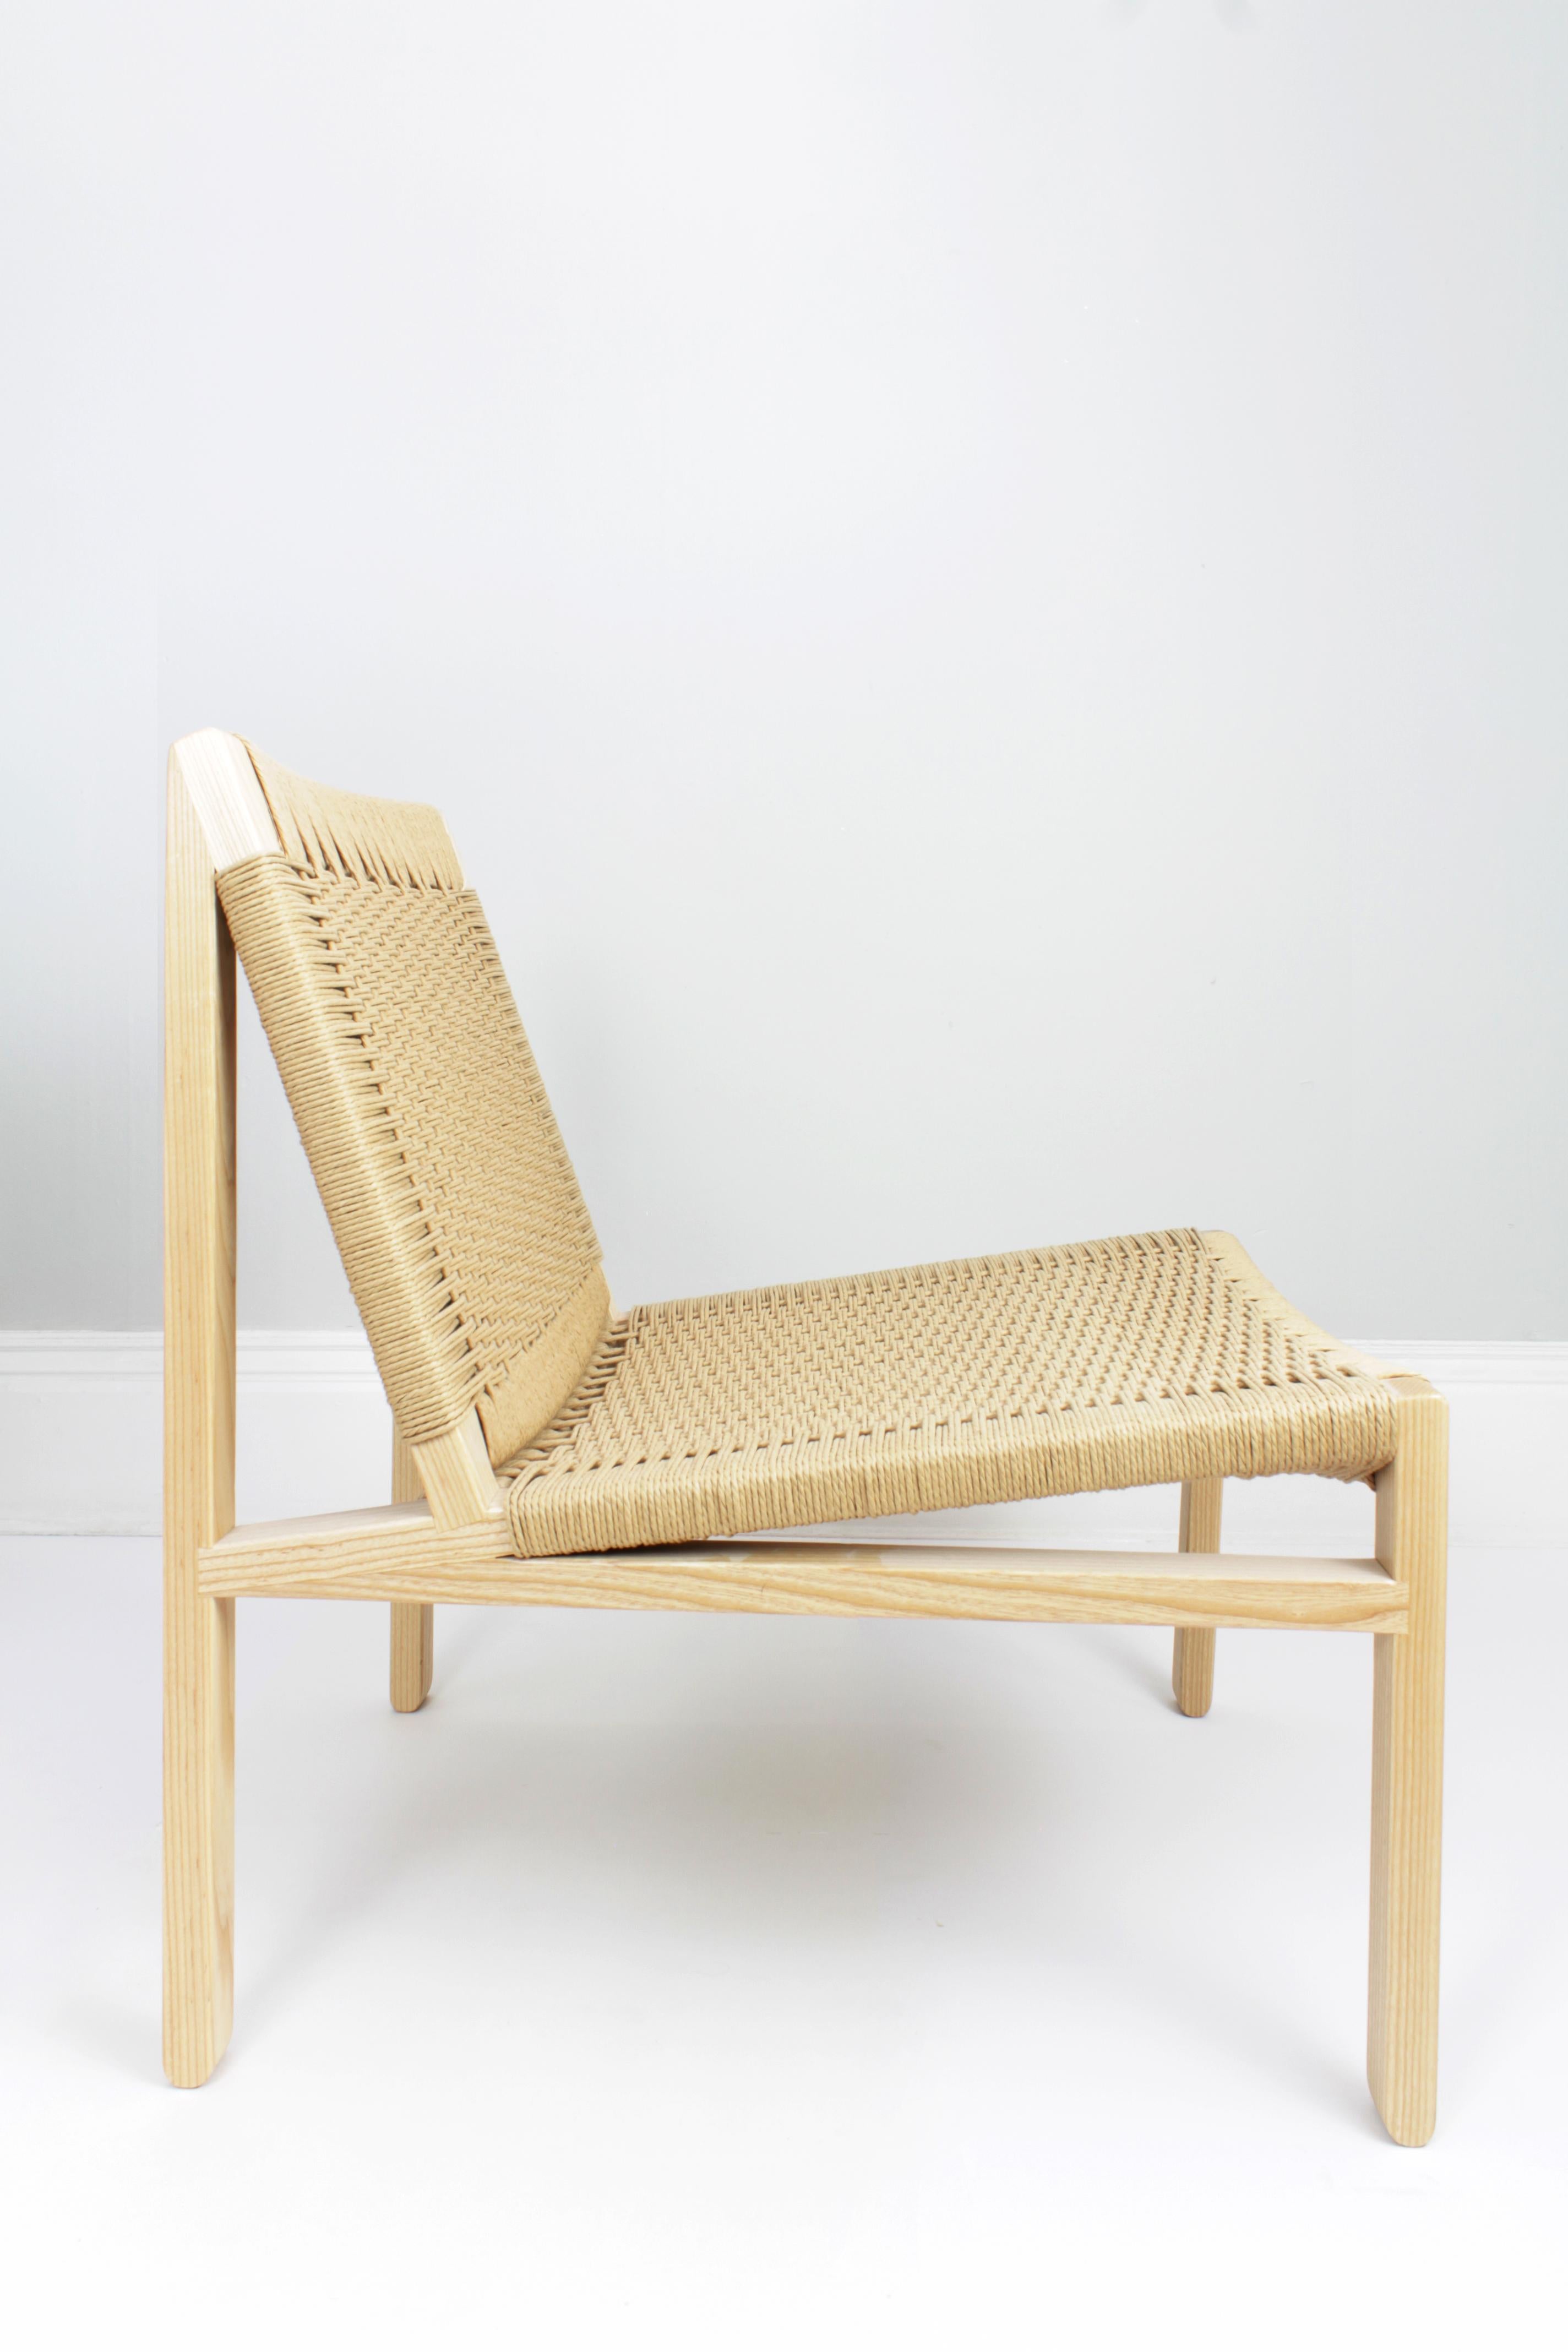 Wood Lars Contemporary Woven Lounge Chair For Sale